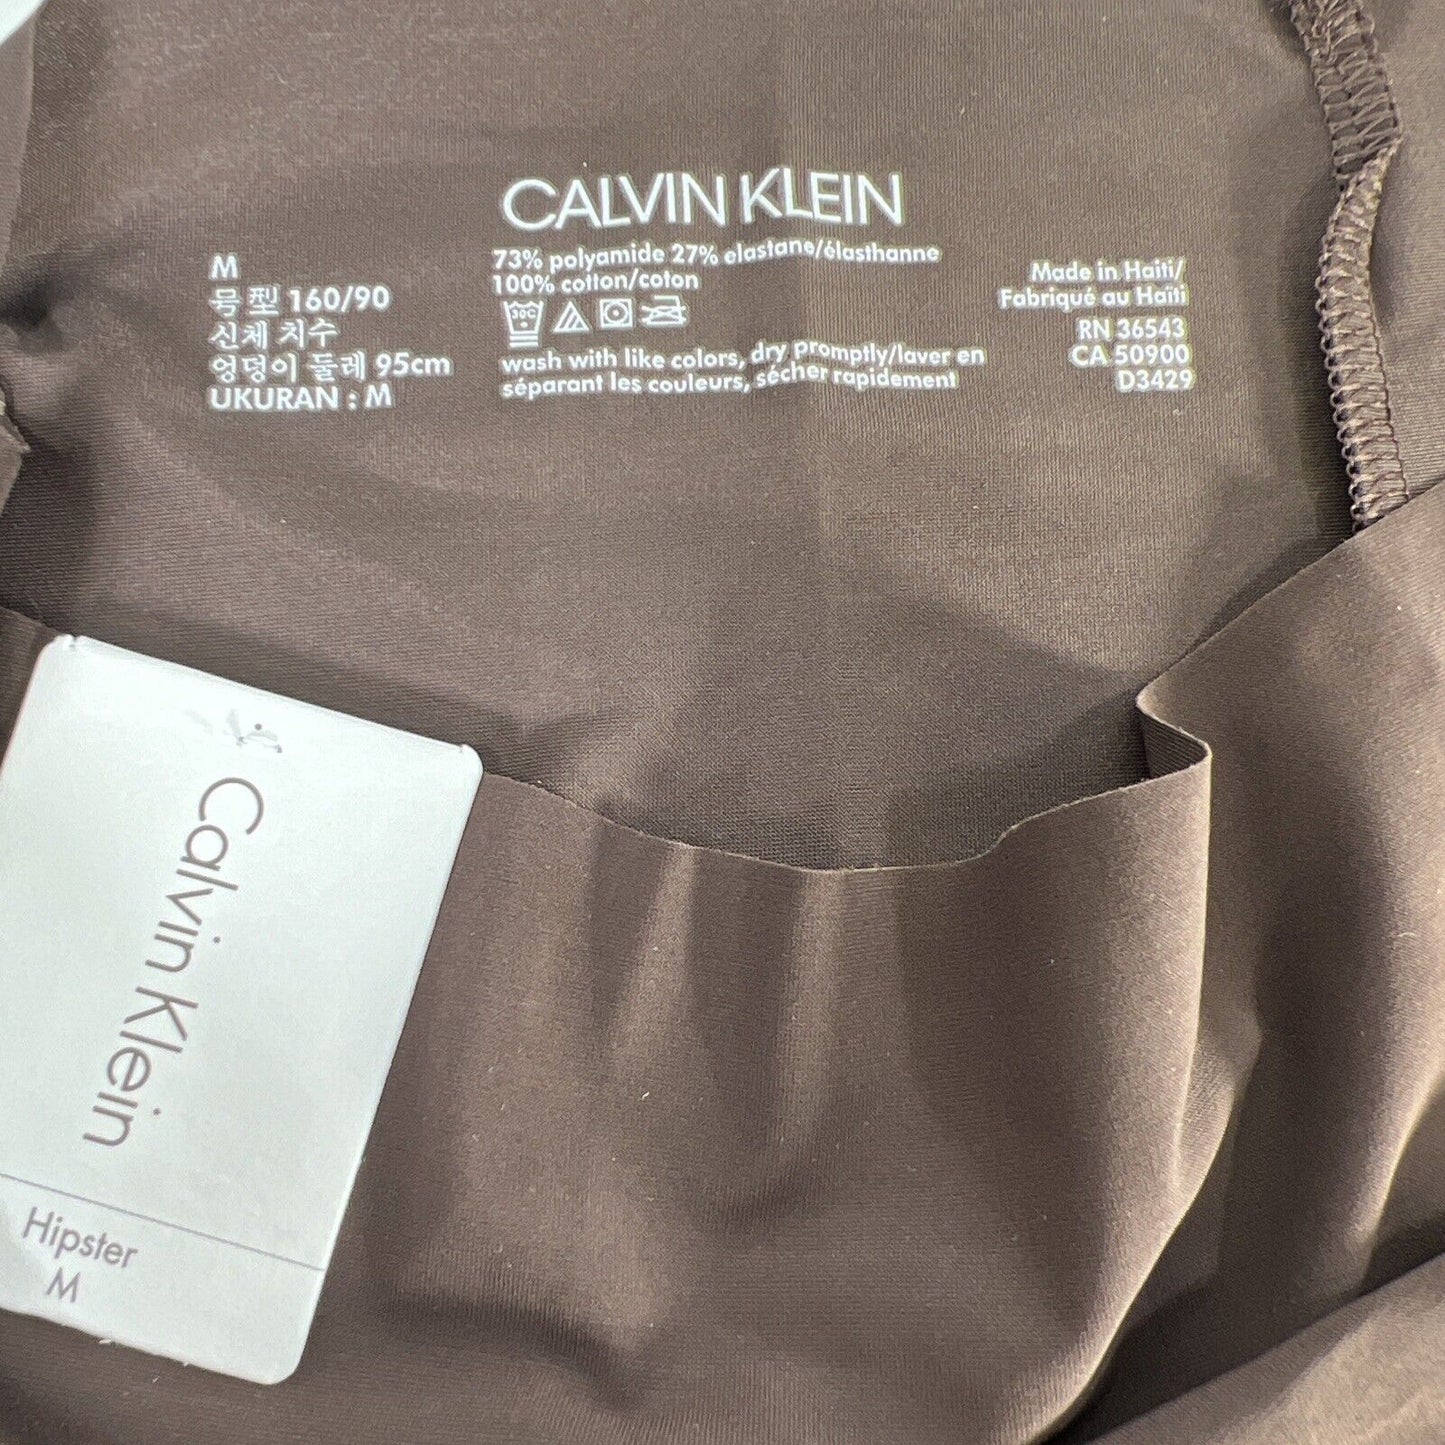 NEW Calvin Klein Women's Brown Invisible Hipster Underwear Lot of 3 - M